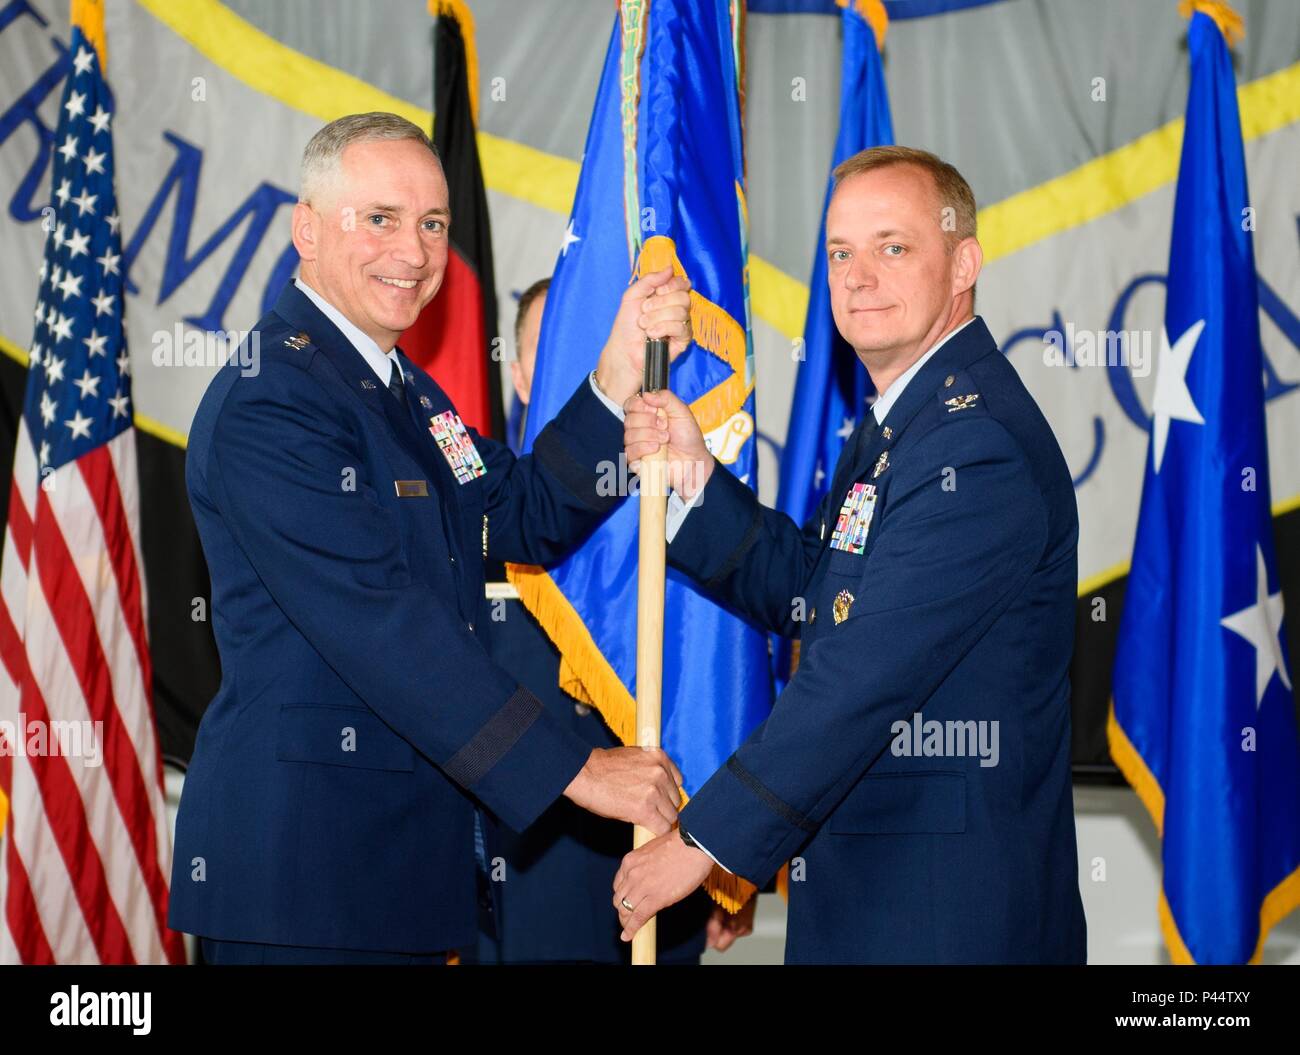 Maj. Gen. Frederick Martin, U.S. Air Force Expeditionary Center commander, passes the 521st Air Mobility Operations Wing flag to Col. Thomas Cooper during a change-of-command ceremony at Ramstein Air Base, Germany, June 14, 2016. With the passing of the flag, Cooper took command of more than 2,000 Airmen throughout Europe and Africa. (U.S. Air Force photo/Staff Sgt. Armando A. Schwier-Morales) Stock Photo